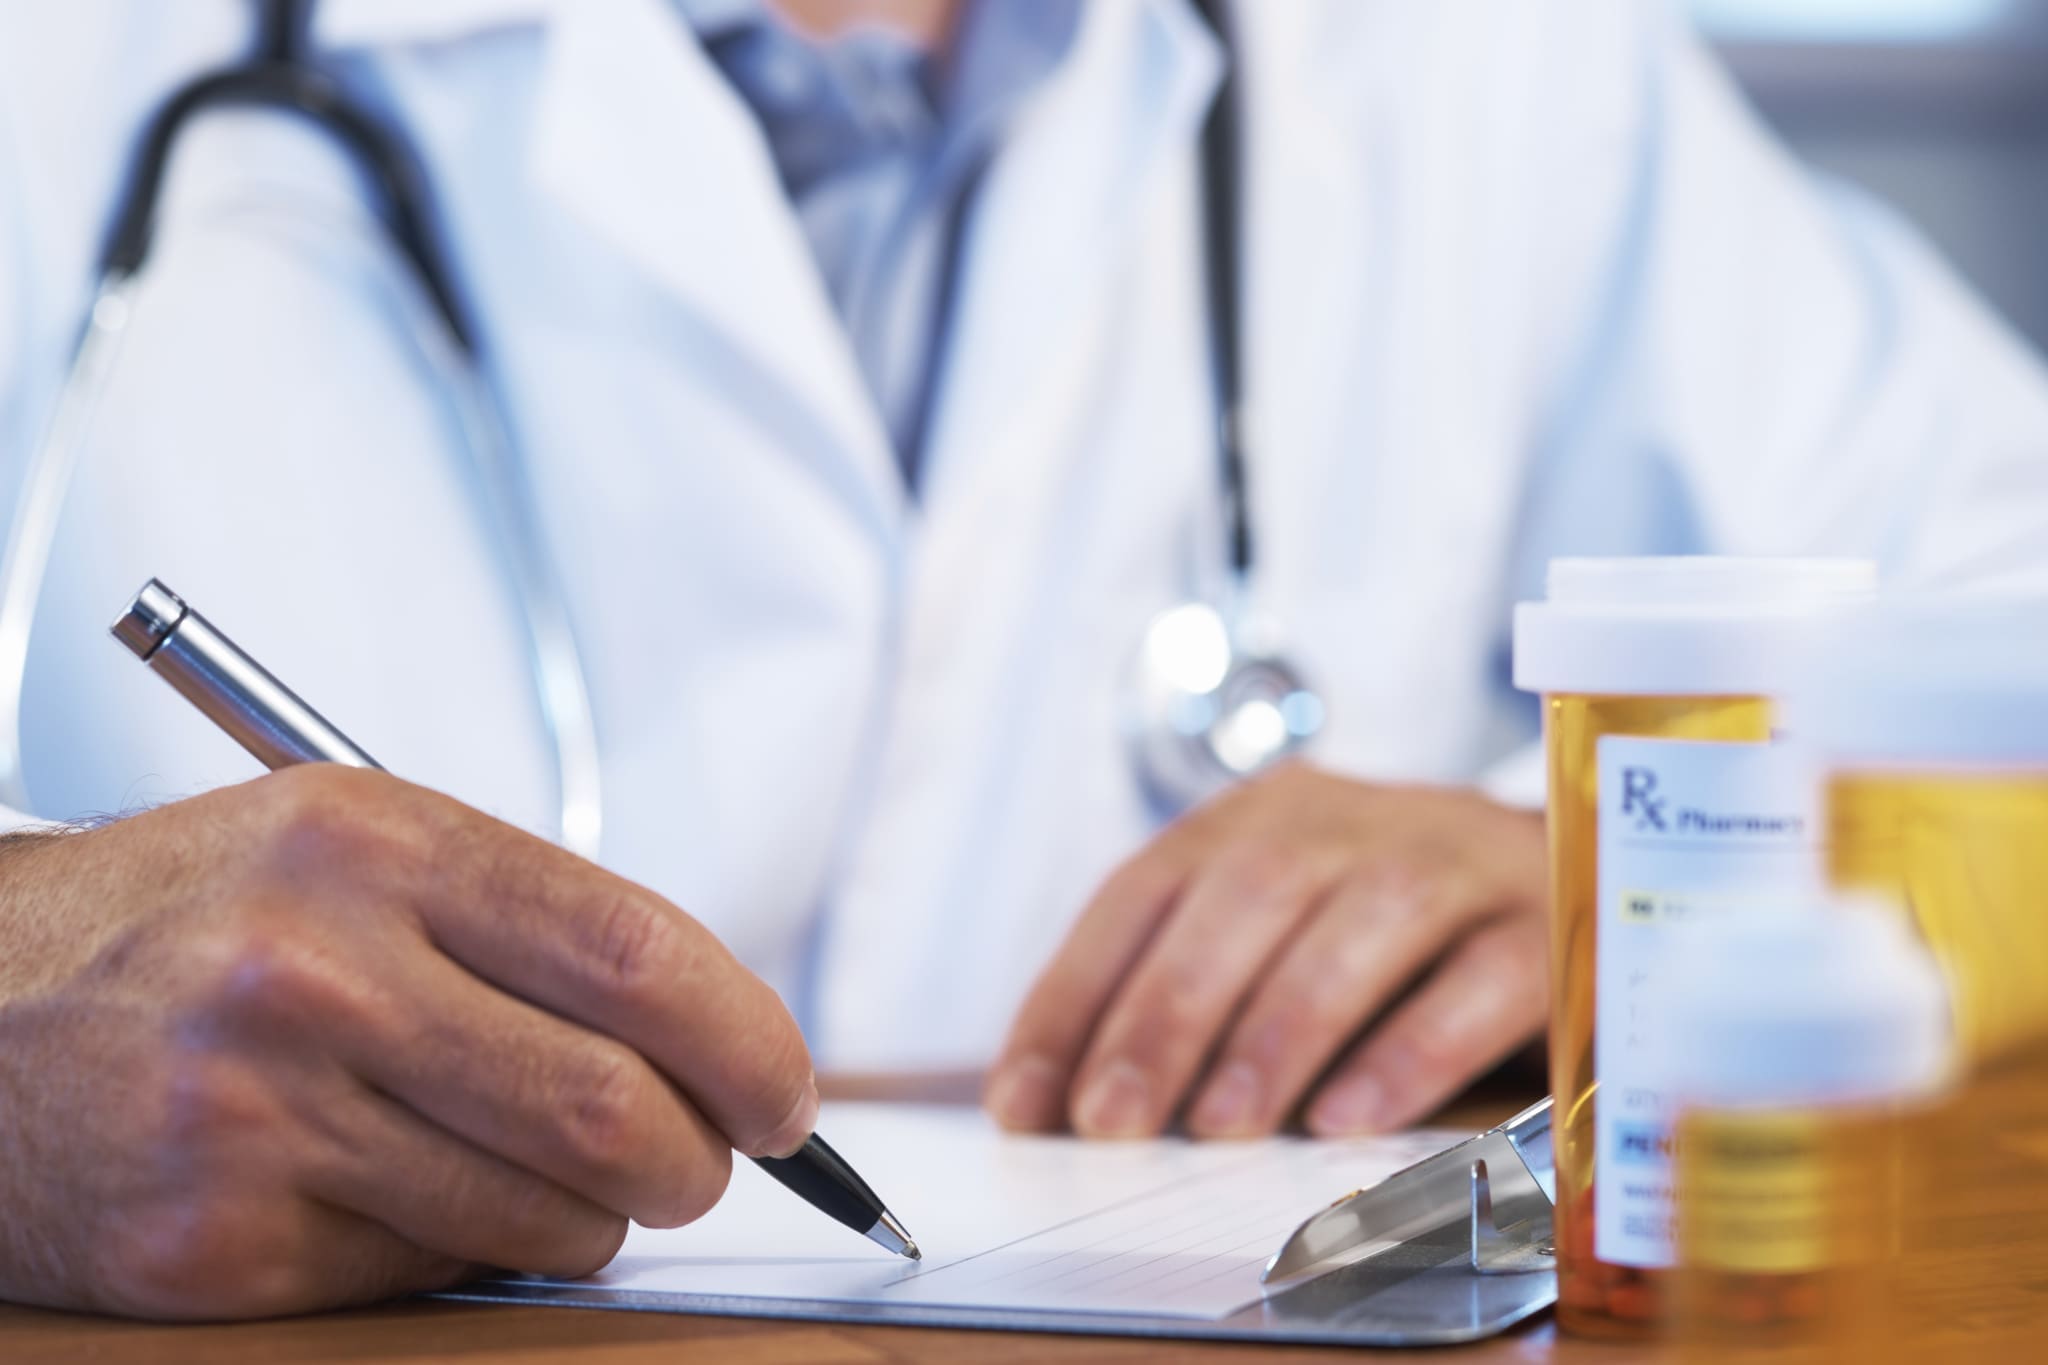 The Massachusetts Medical Society recently committed to educating providers on solutions to prescription drug abuse. (Photo: iStockphoto)